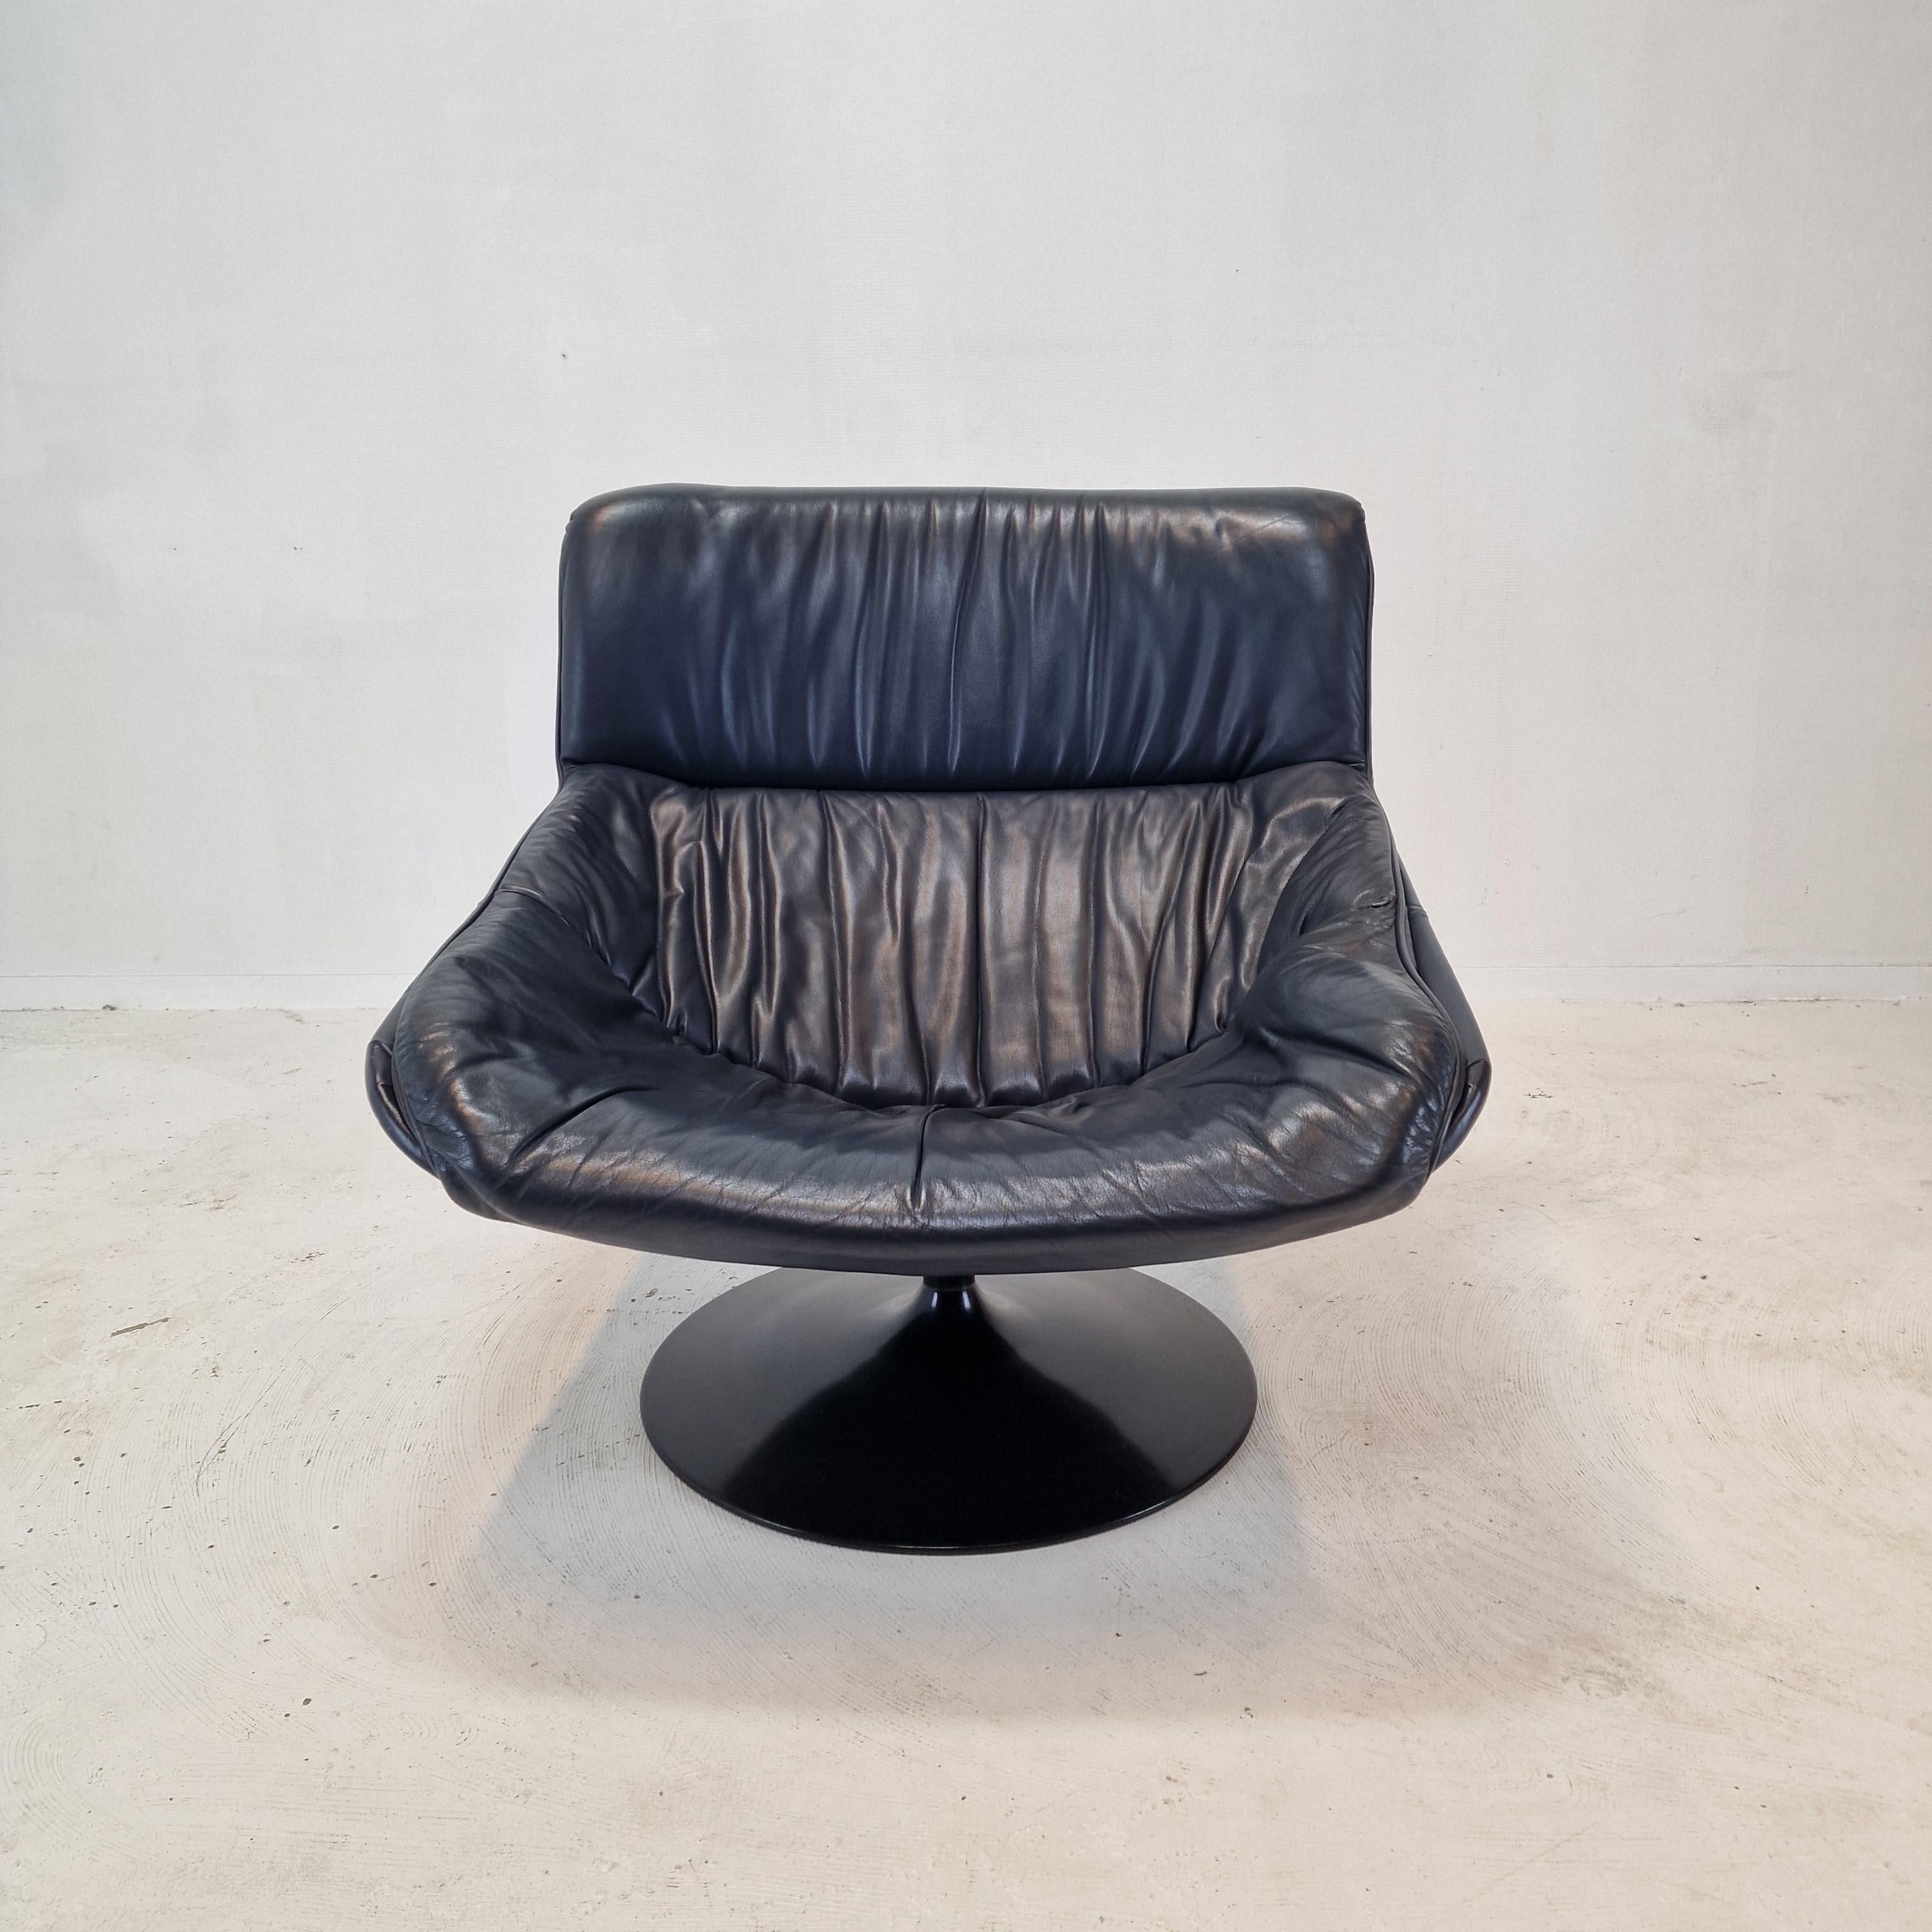 Extremely comfortable Artifort F518 lounge chair. 
Designed by the famous English designer Geoffrey Harcourt in the 70's. 

Very solid wooden frame with a large pivoting metal foot.

The chair has the original high quality leather, color dark